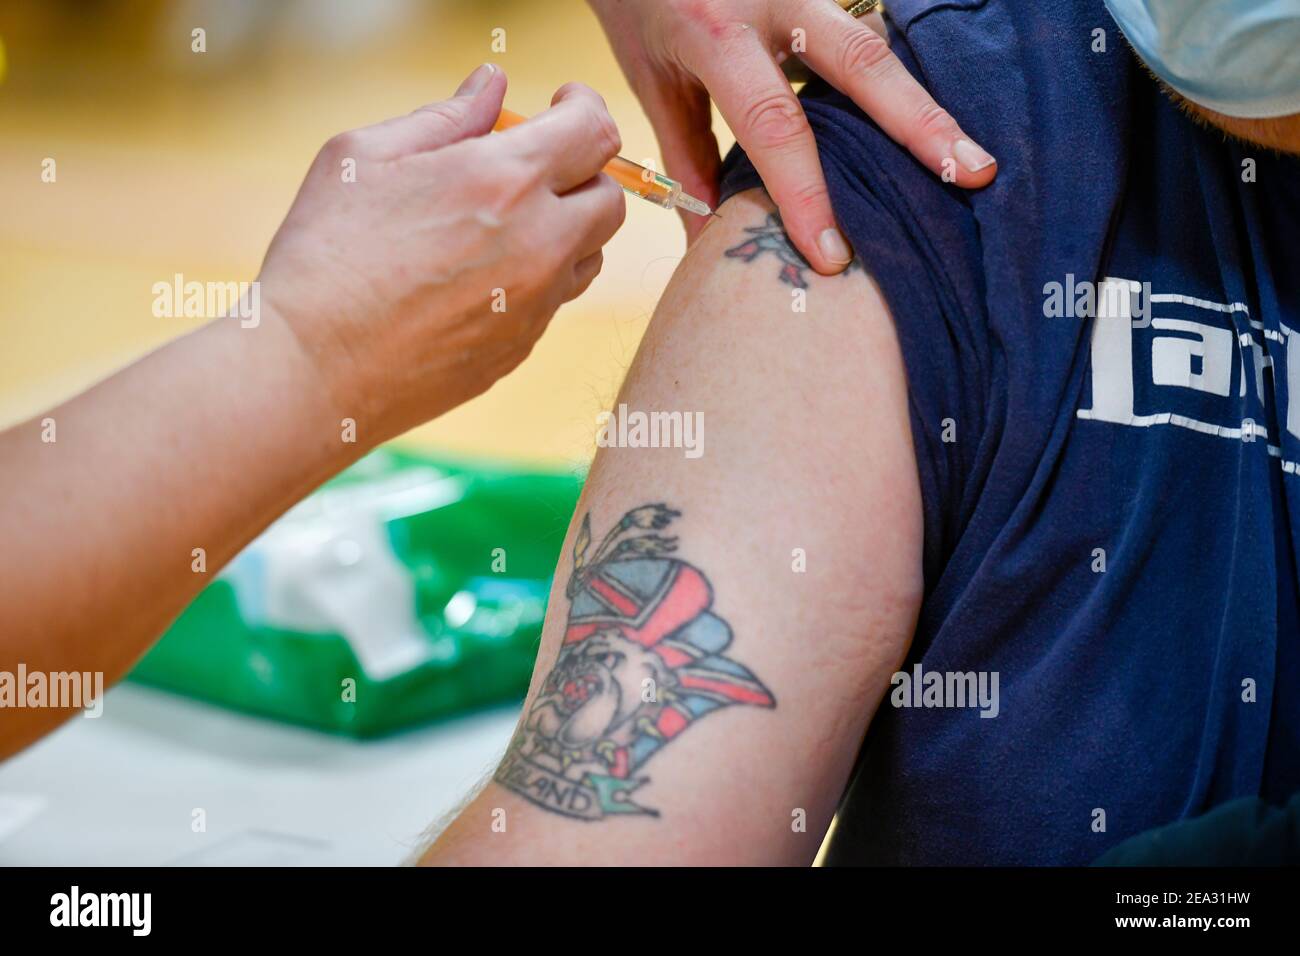 A man with a union flag tattoo featuring a bulldog and the word England receives his Covid-19 vaccine. A Covid19 vaccination session held at Workington Leisure Centre in Cumbria using the Oxford Astra Zeneca vaccine. The cohort being given the vaccine are those over 70 years-old along with younger people who had been shielding or were clinically extremely vulnerable. The Workington Primary Care Network relocated from the town's surgeries to the larger space of the leisure centre to speed up the vaccine delivery: 6 February 2021 STUART WALKER  Stuart Walker Photography 2021 Stock Photo